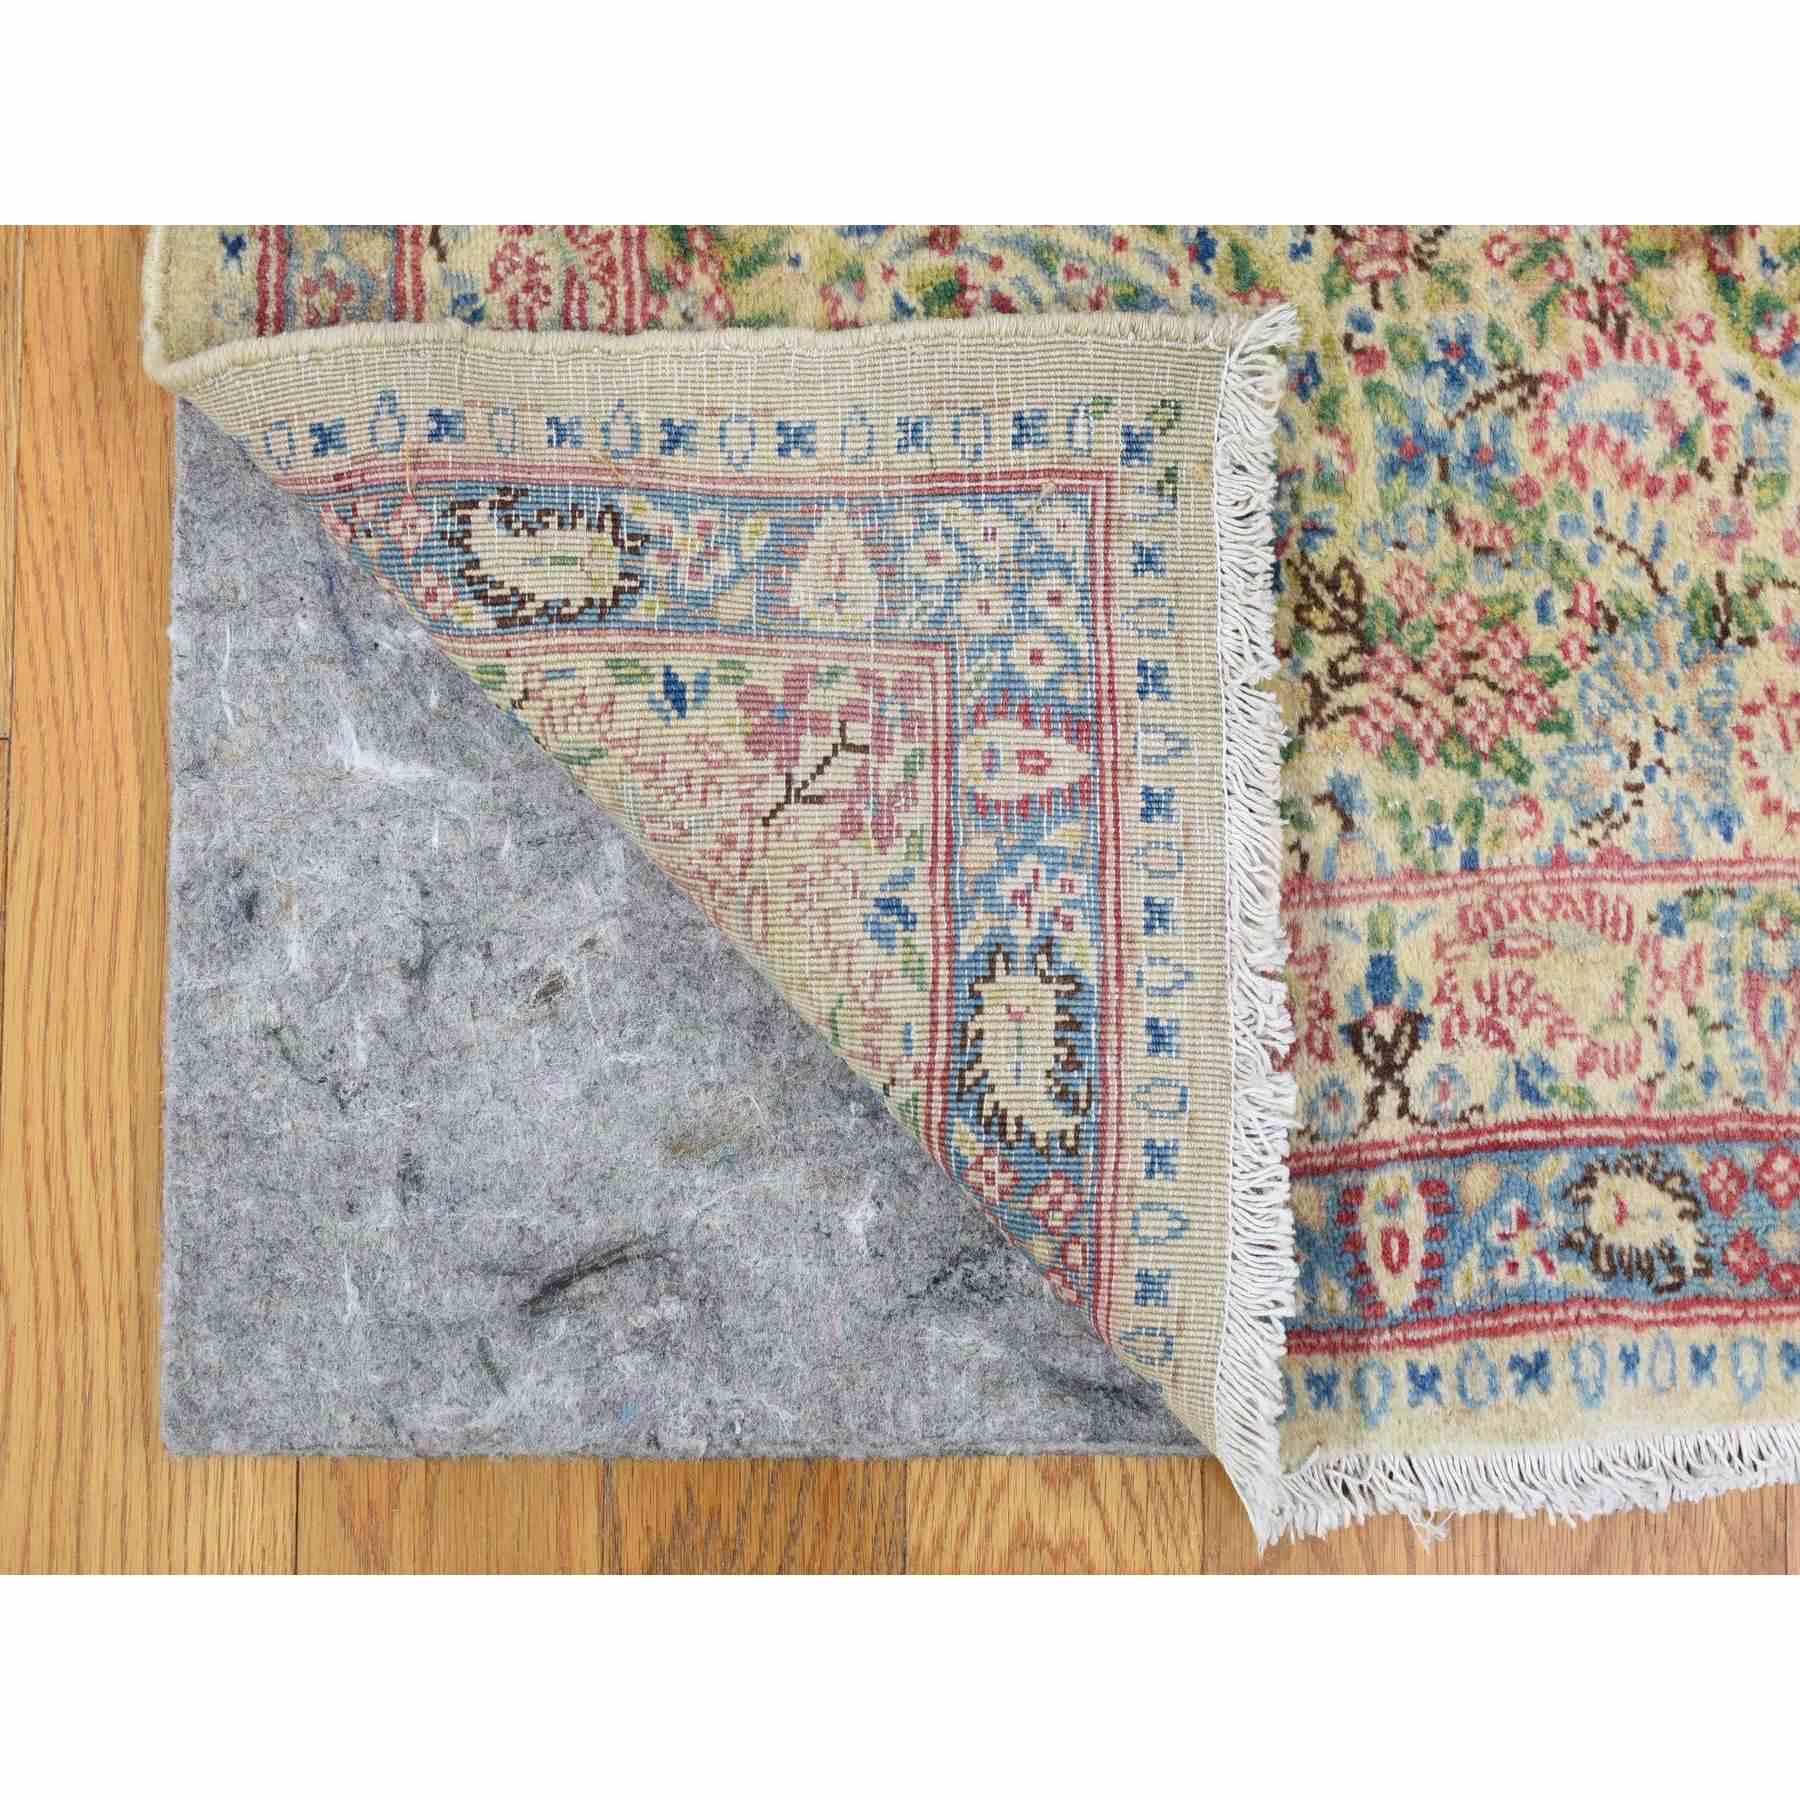 Antique-Hand-Knotted-Rug-334990